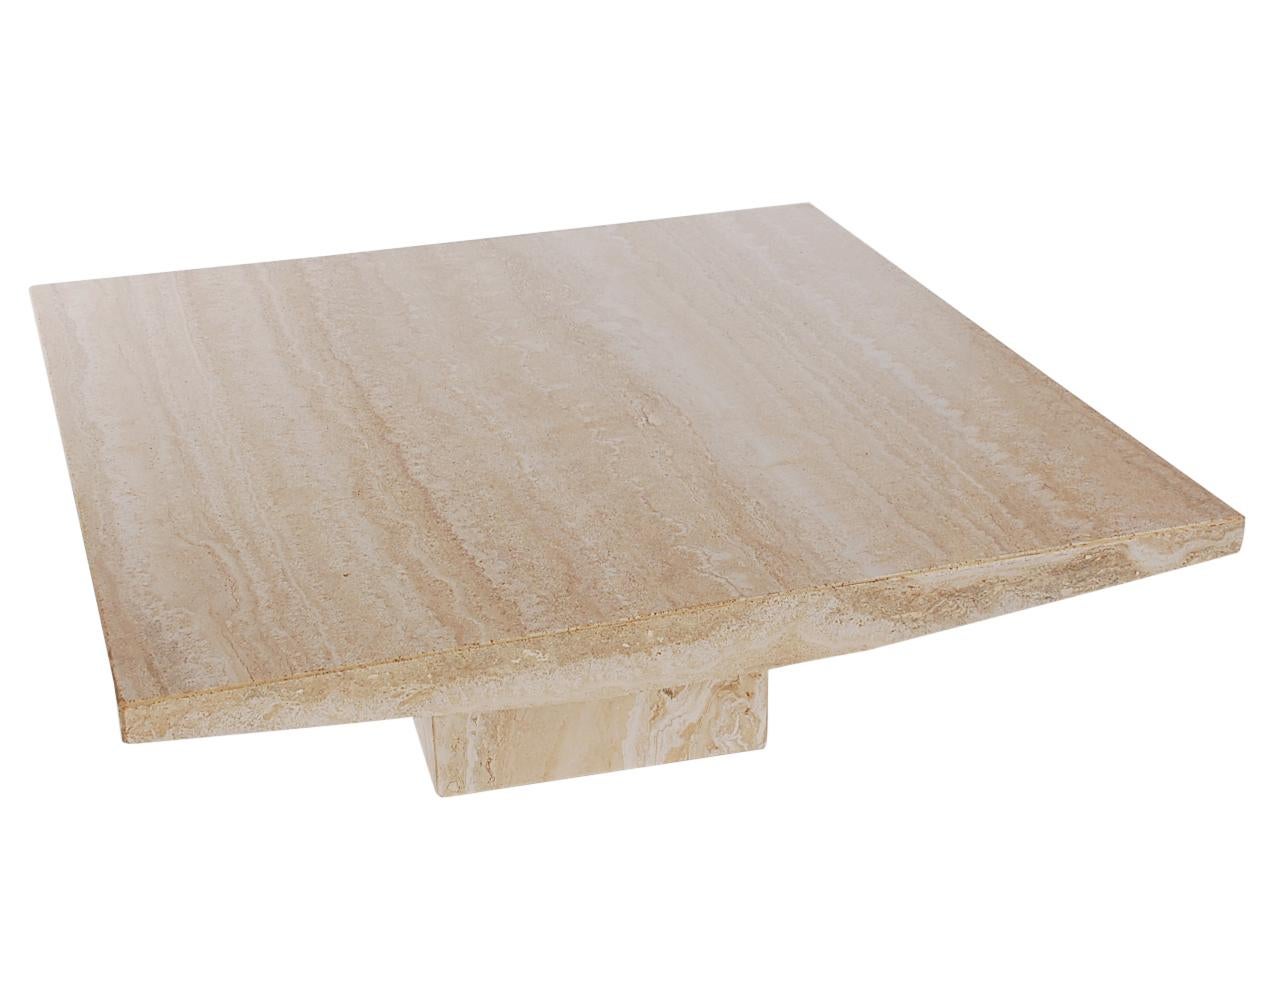 A simple and stunning coffee table from Italy circa 1970s. This table is constructed of thick slabs of travertine. Very clean and ready for immediate use.